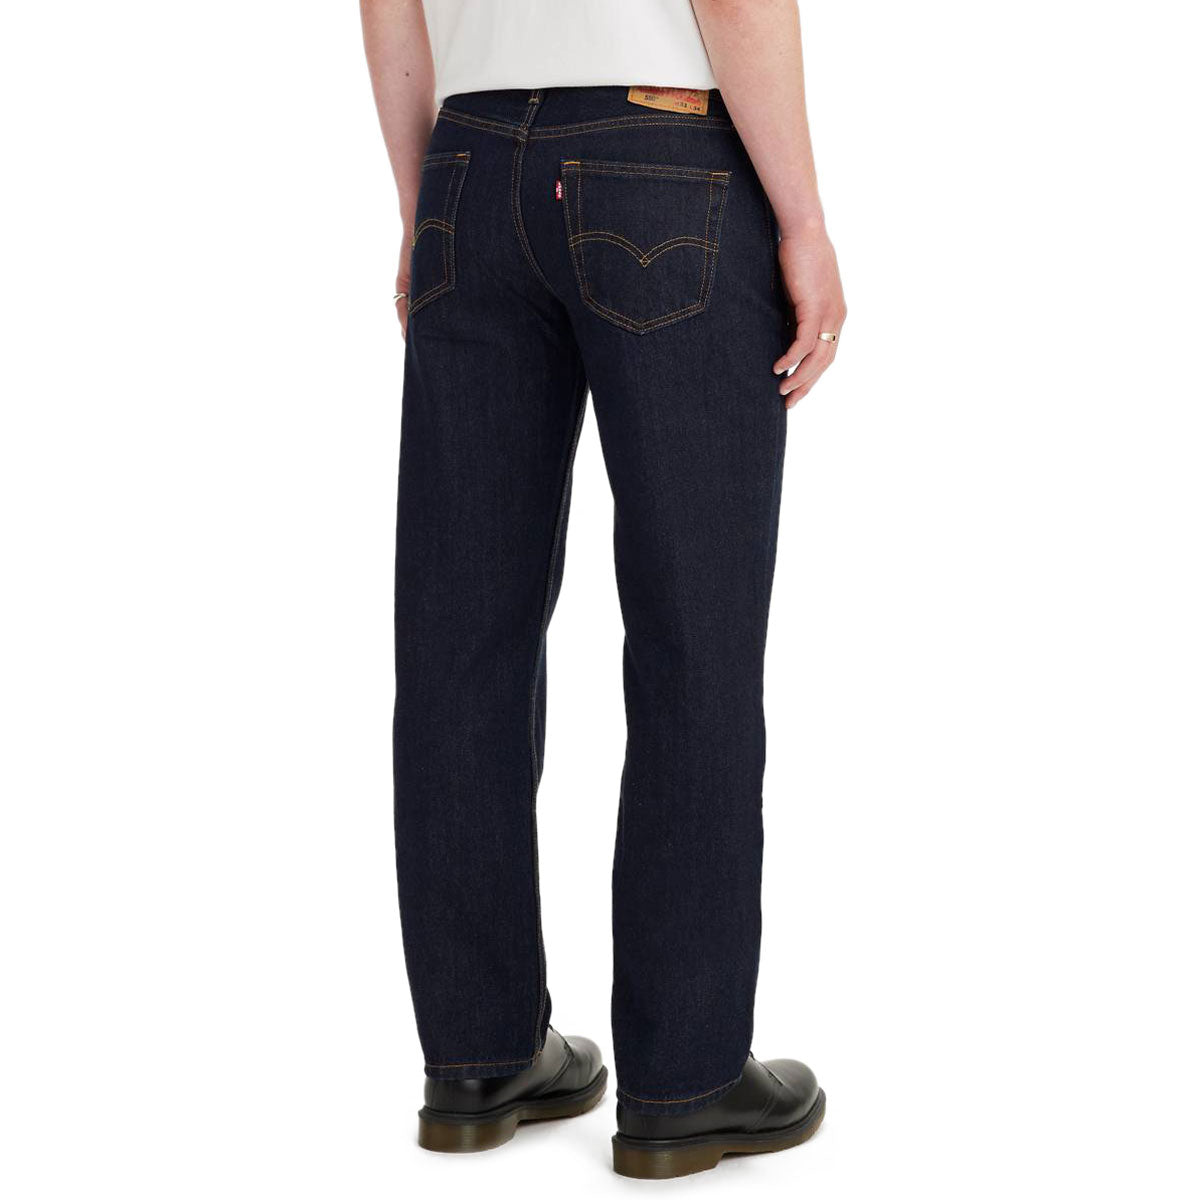 Levi's 550 Relaxed Jeans - Rinse image 2